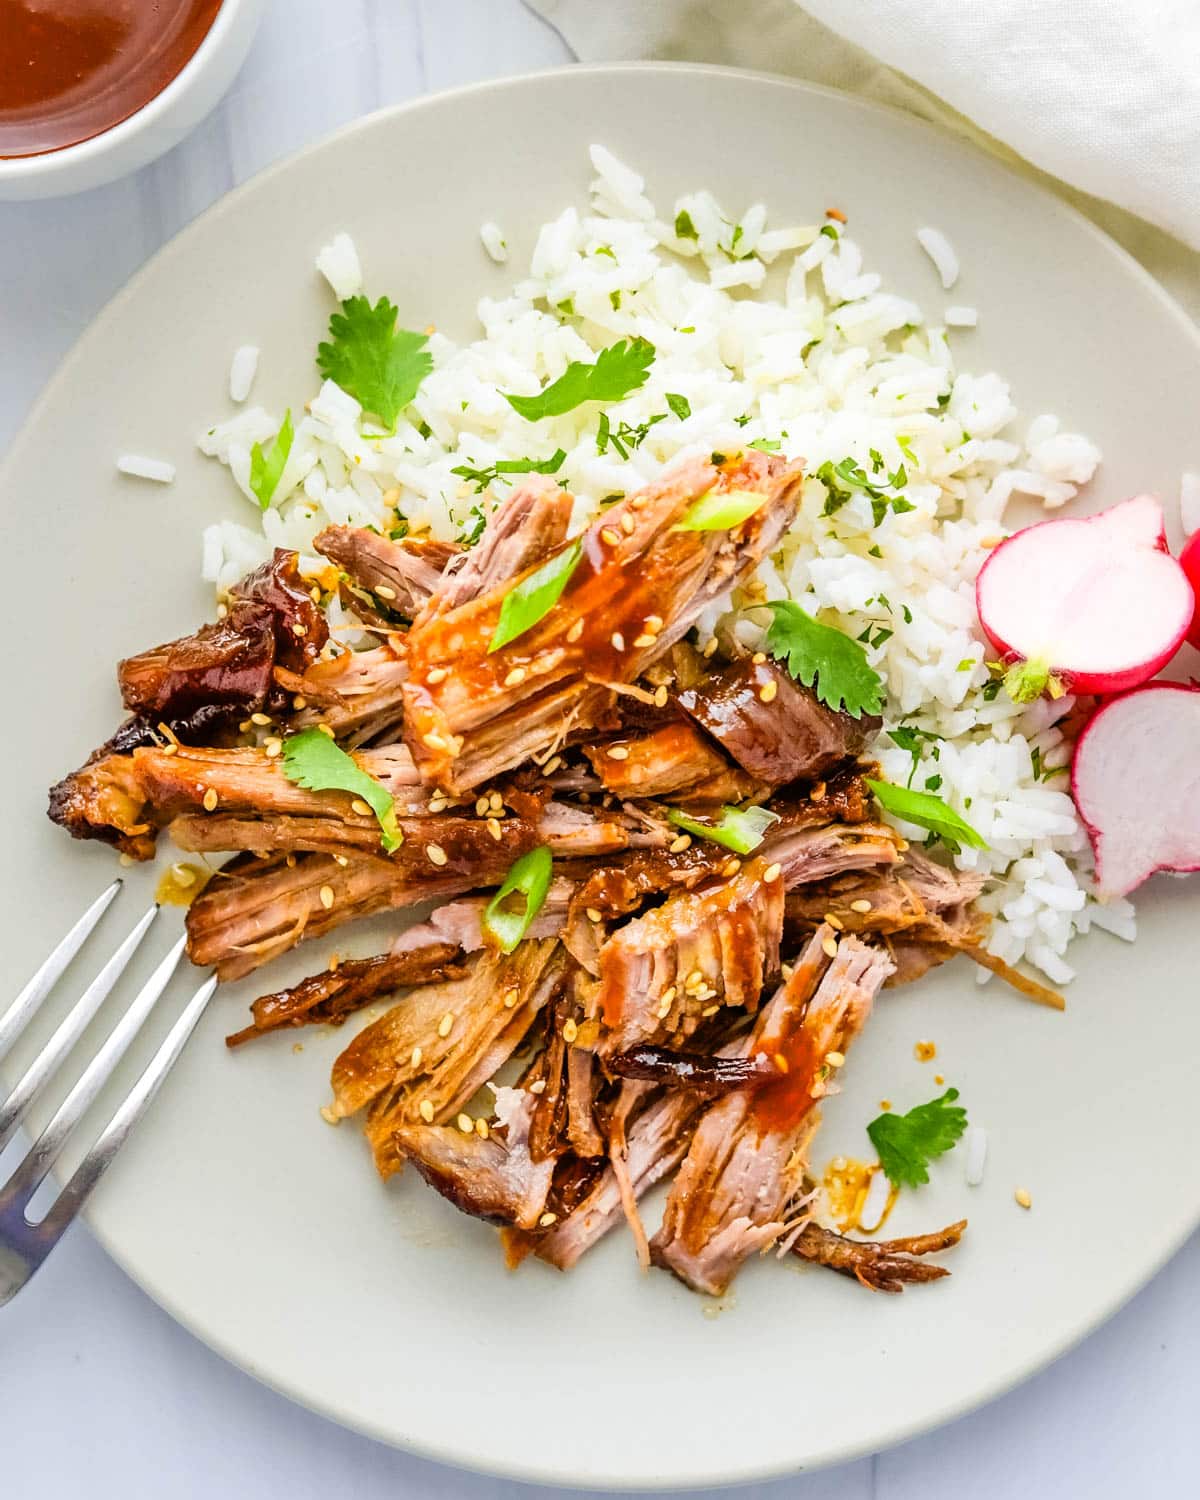 Serving Asian pulled pork with sauce over sticky white rice.